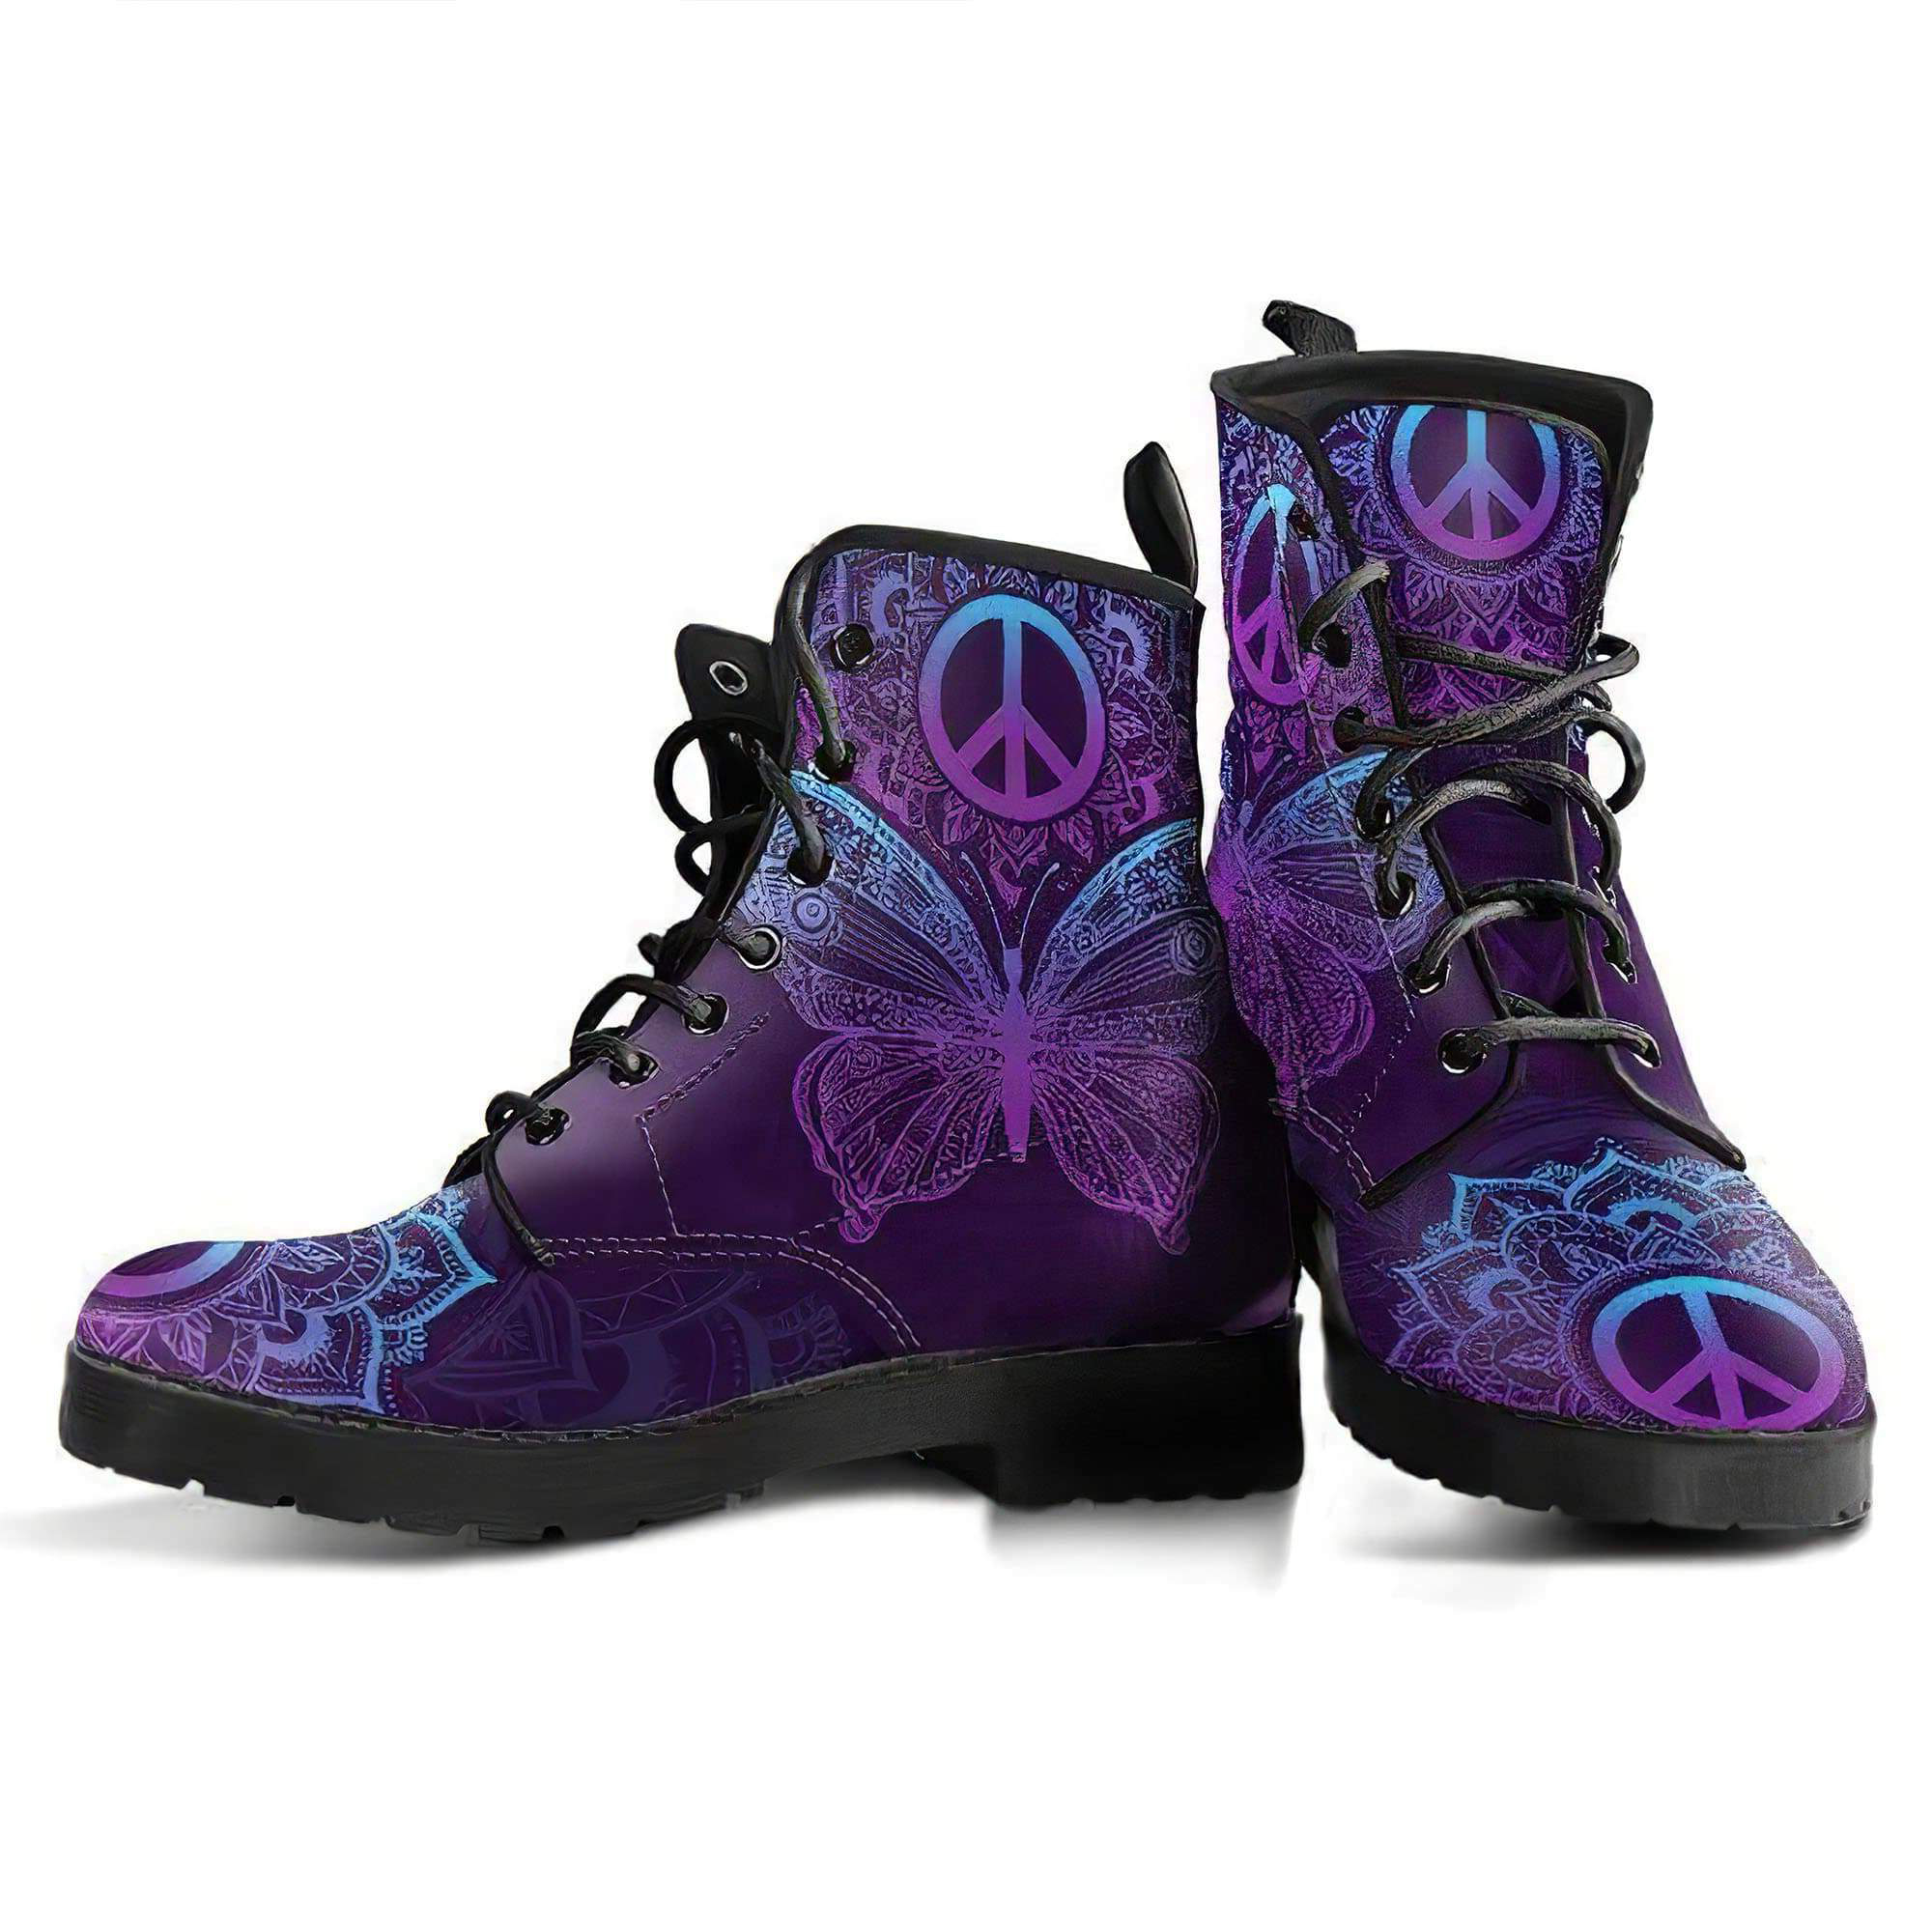 purple-peace-butterfly-handcrafted-boots-women-s-leather-boots-12051938902077.jpg